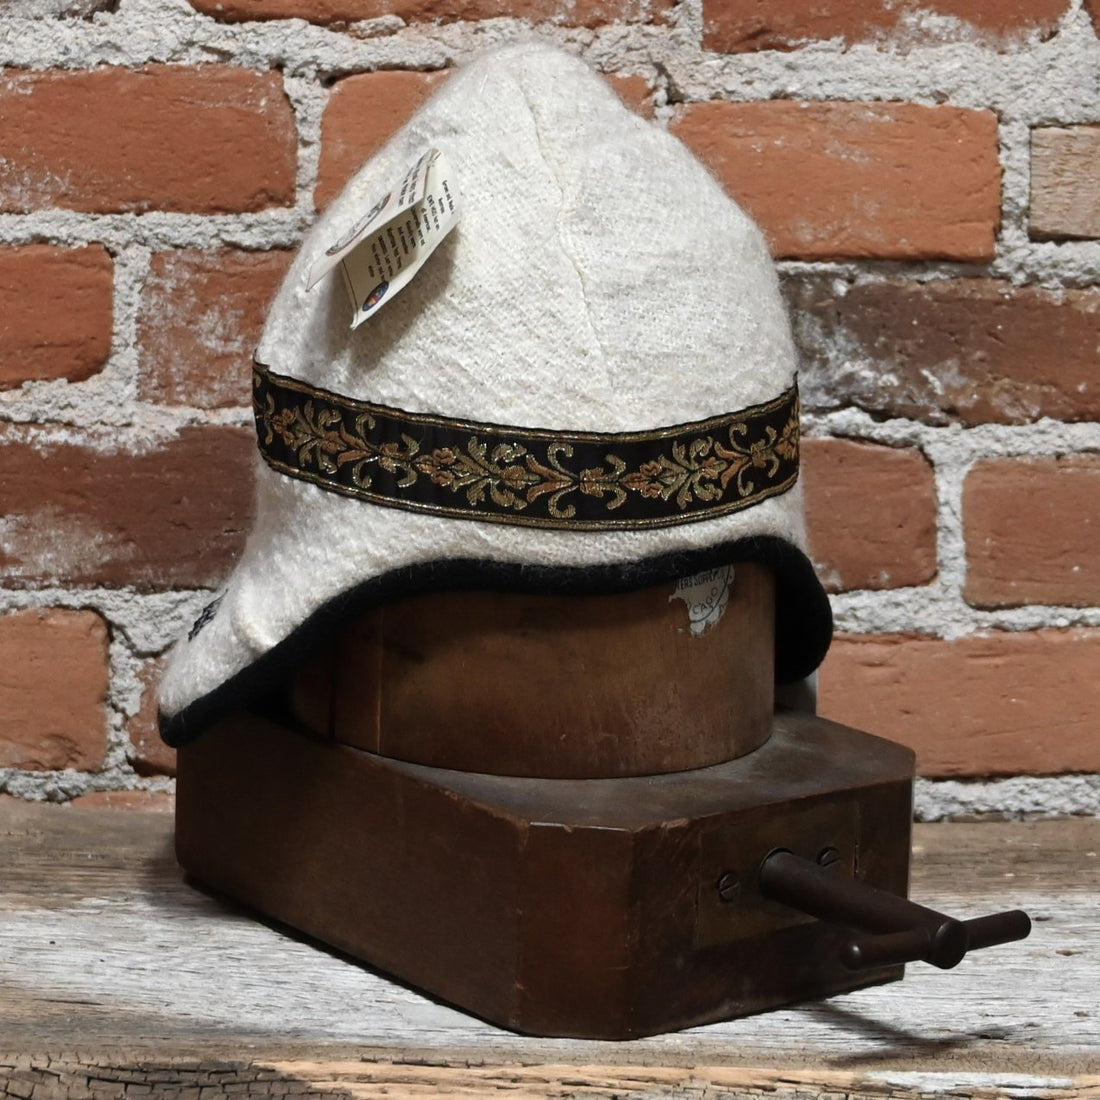 Wool hat with ear flap and decorative band view of hat